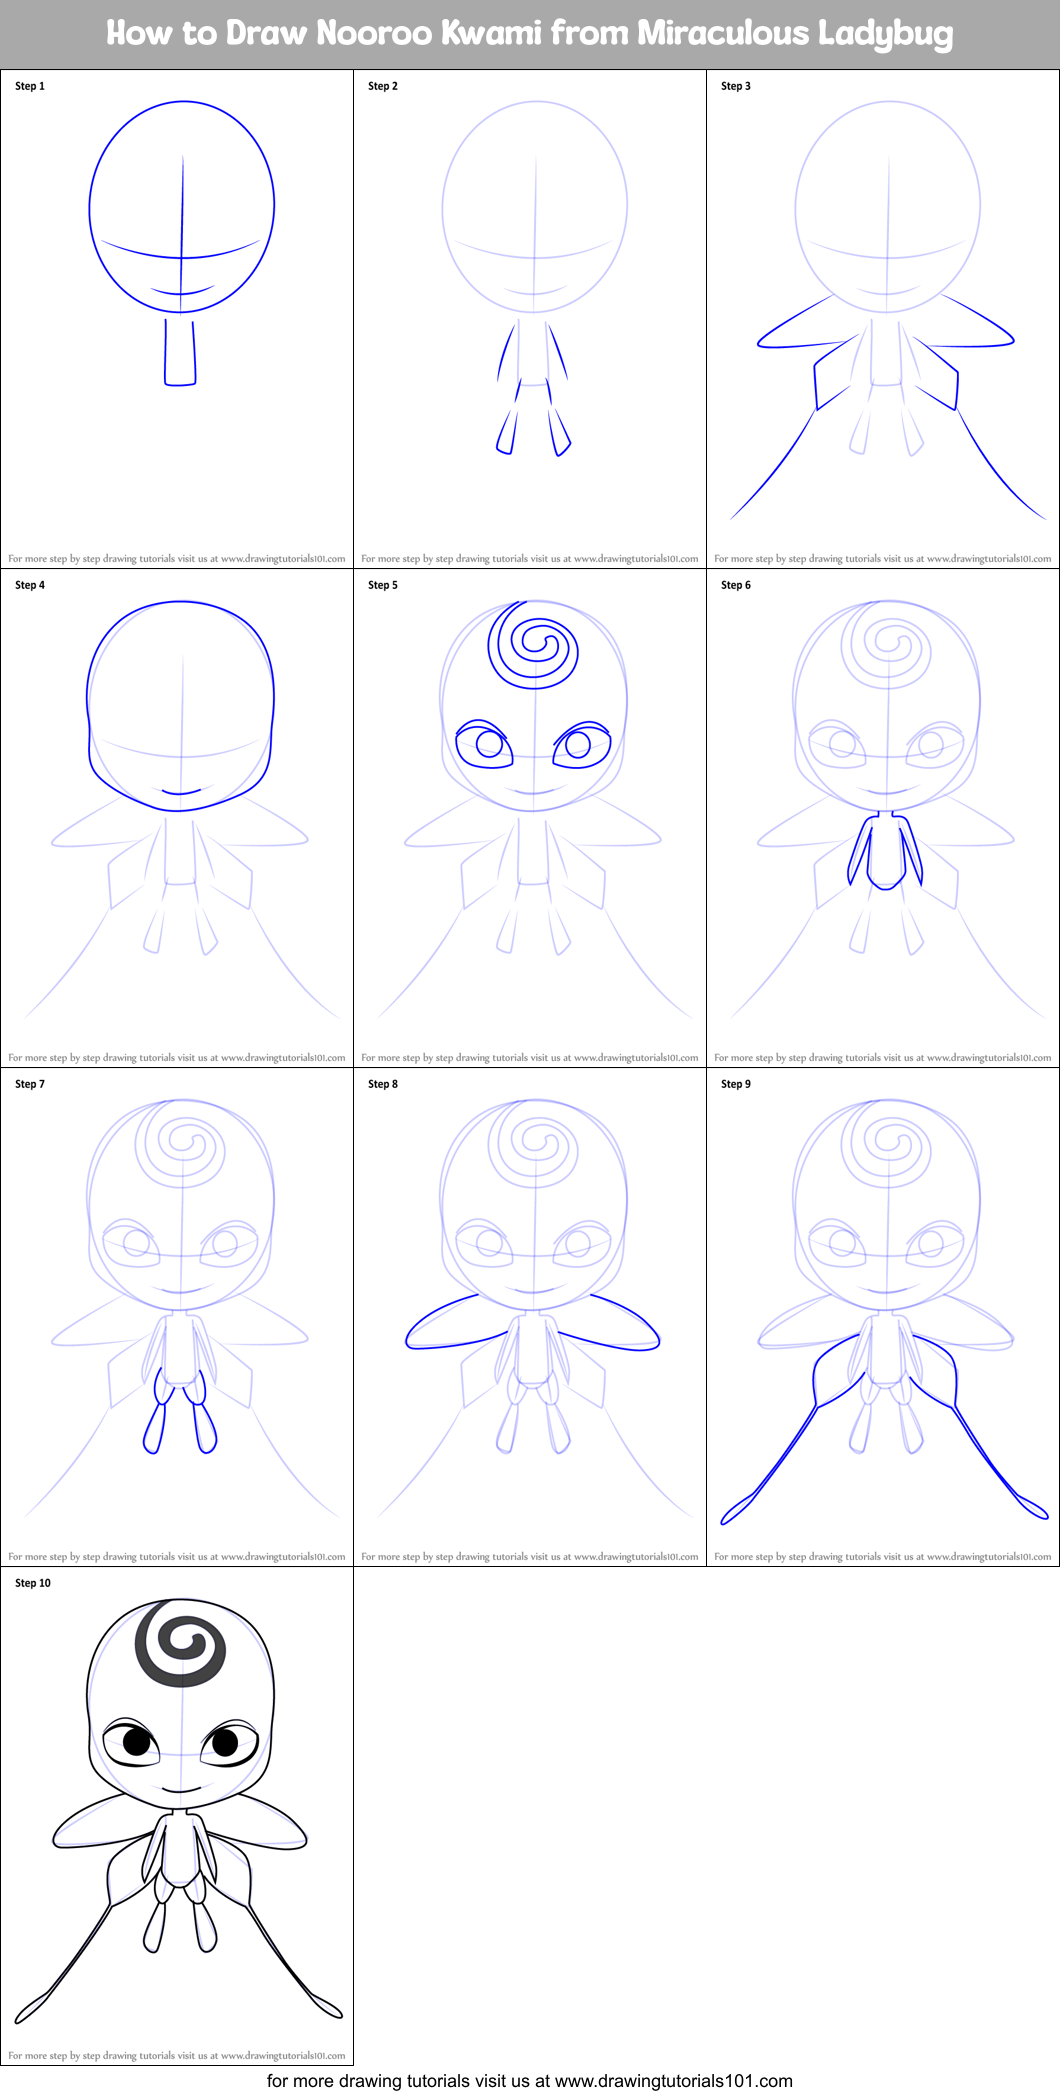 How to Draw Nooroo Kwami from Miraculous Ladybug printable step by step